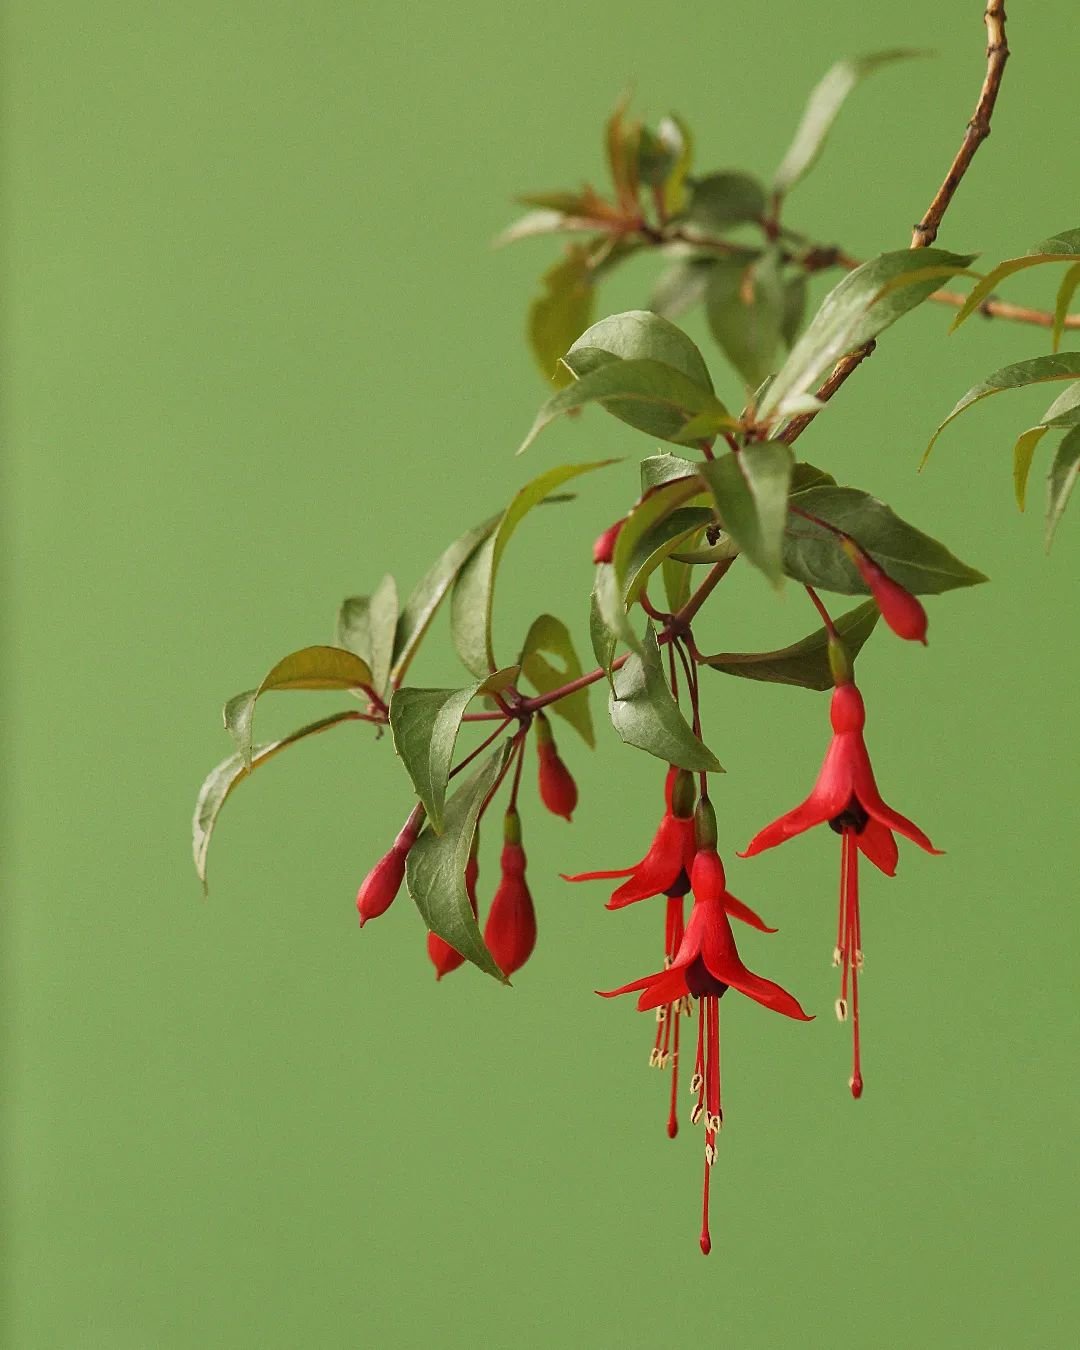 A close-up image of vibrant fuchsia flowers in full bloom.